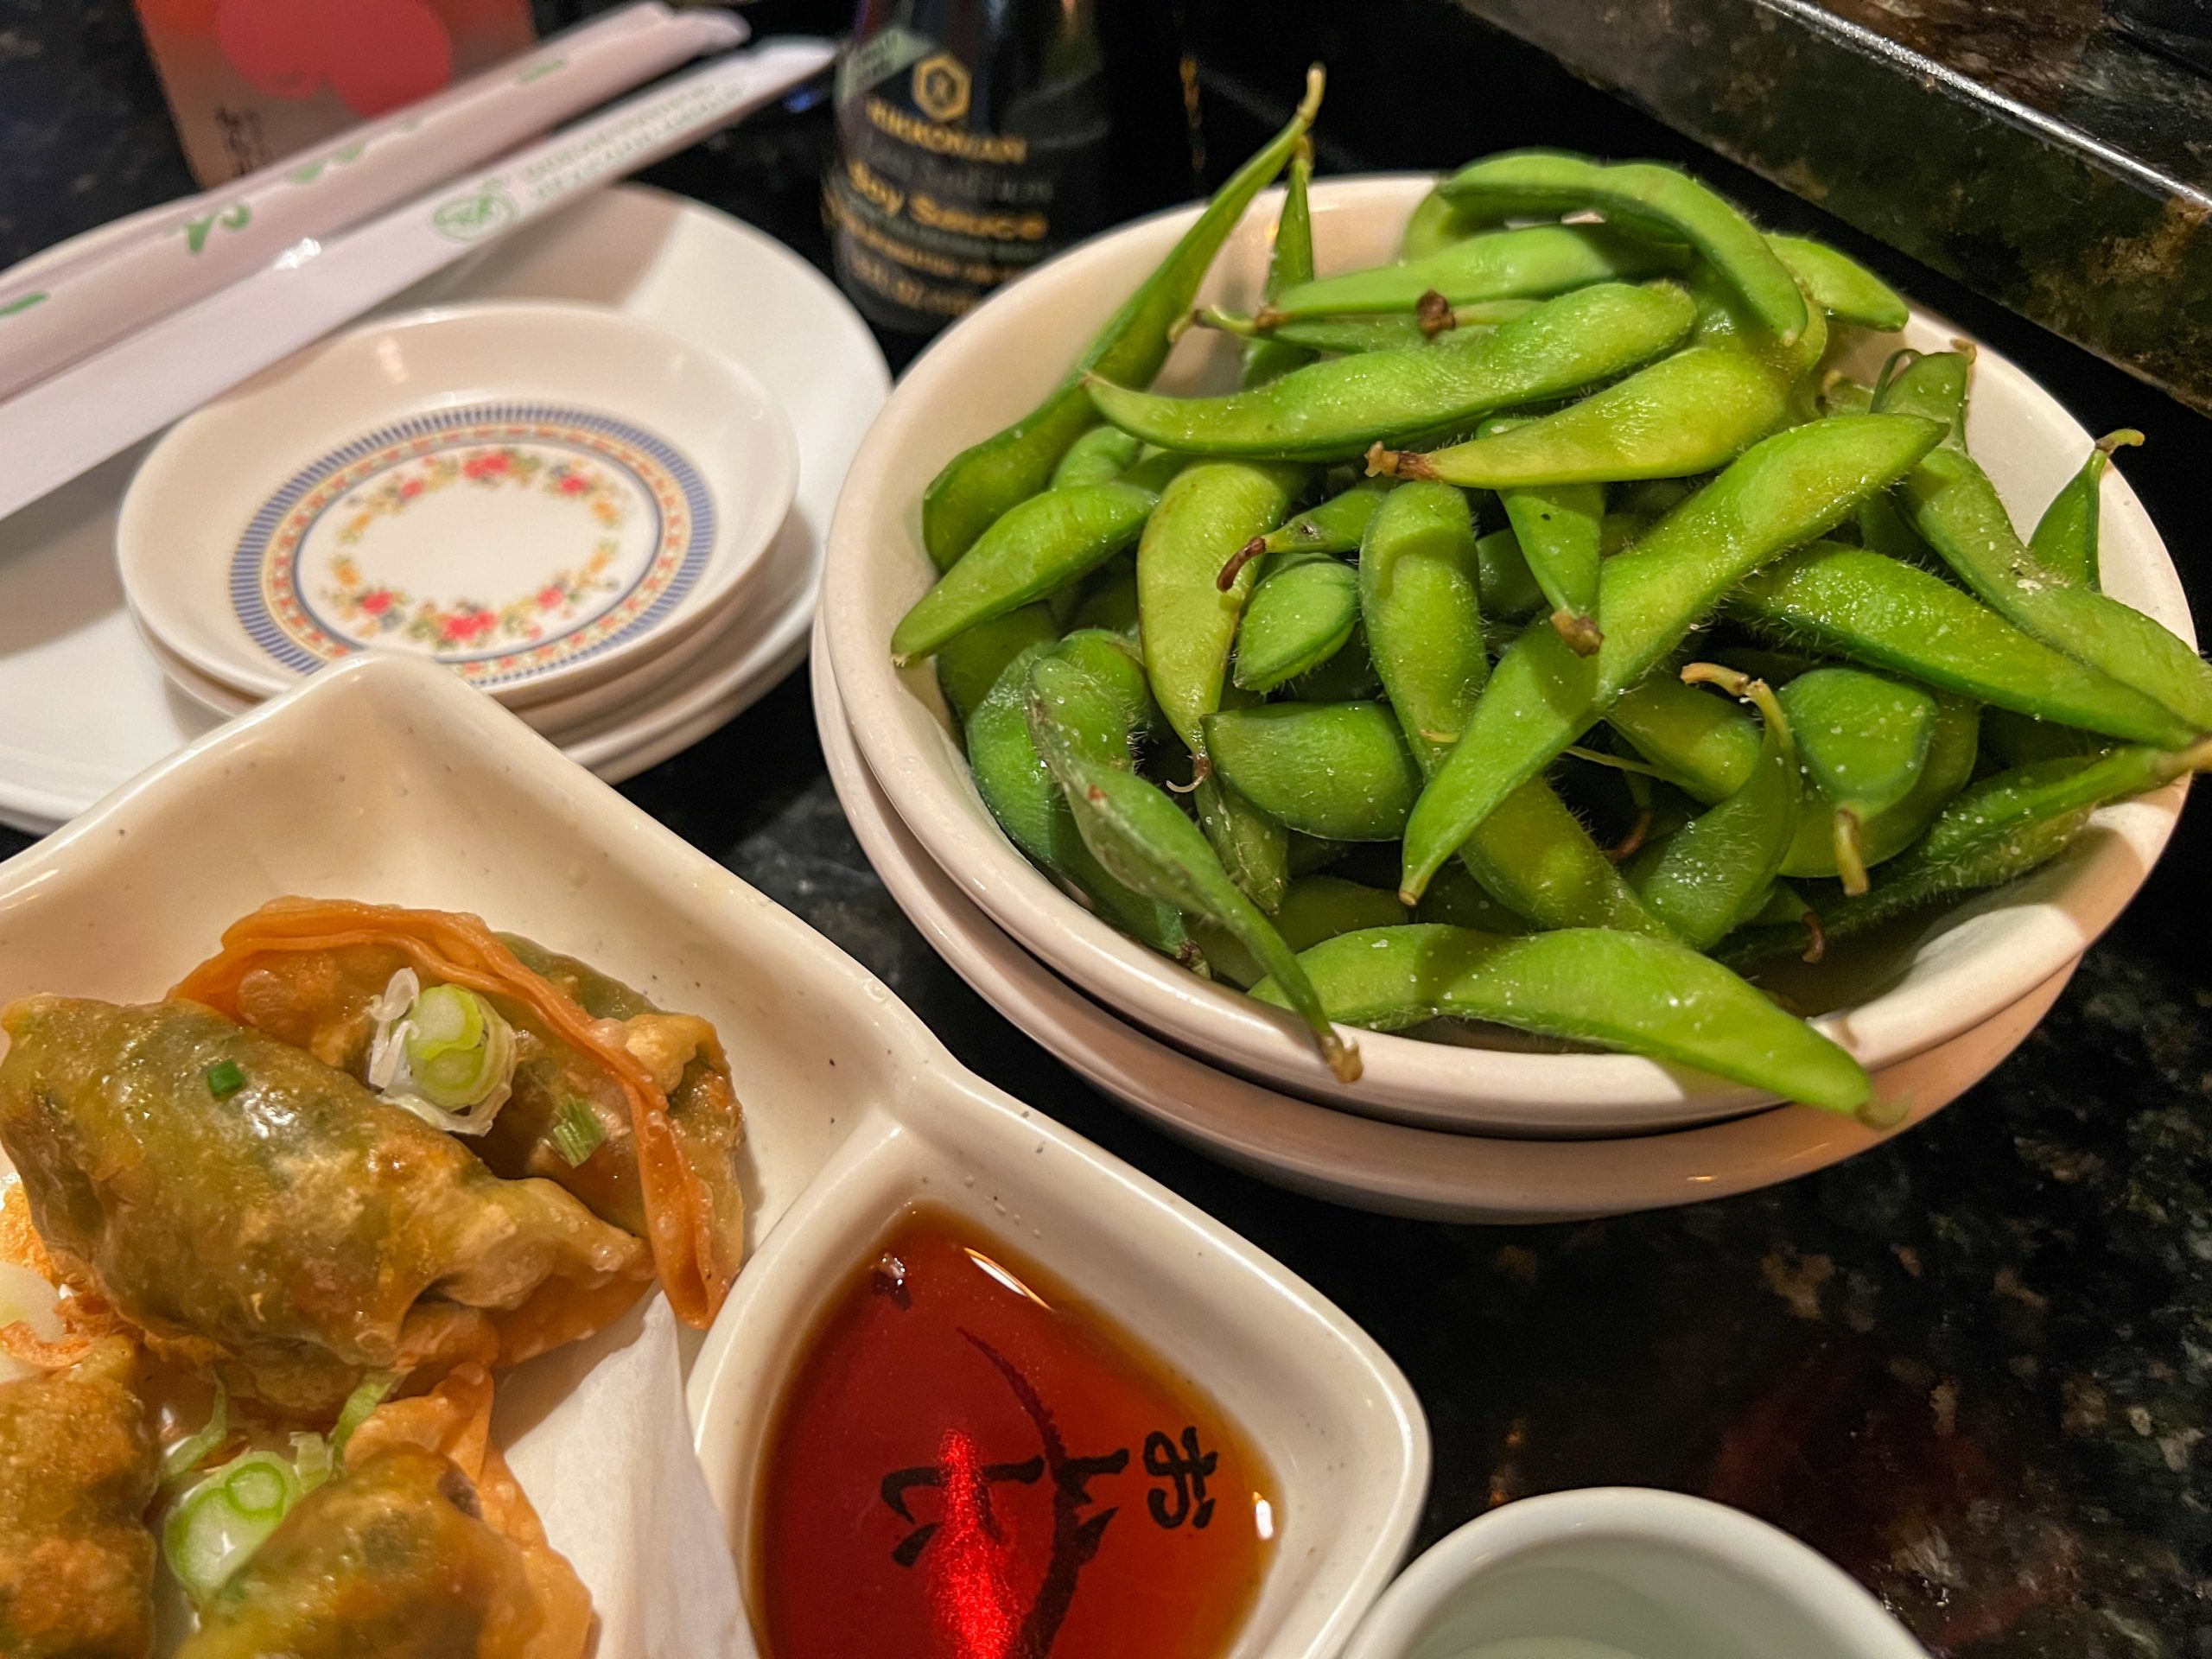 Vegetable Gyoza and the edamame for appetizers